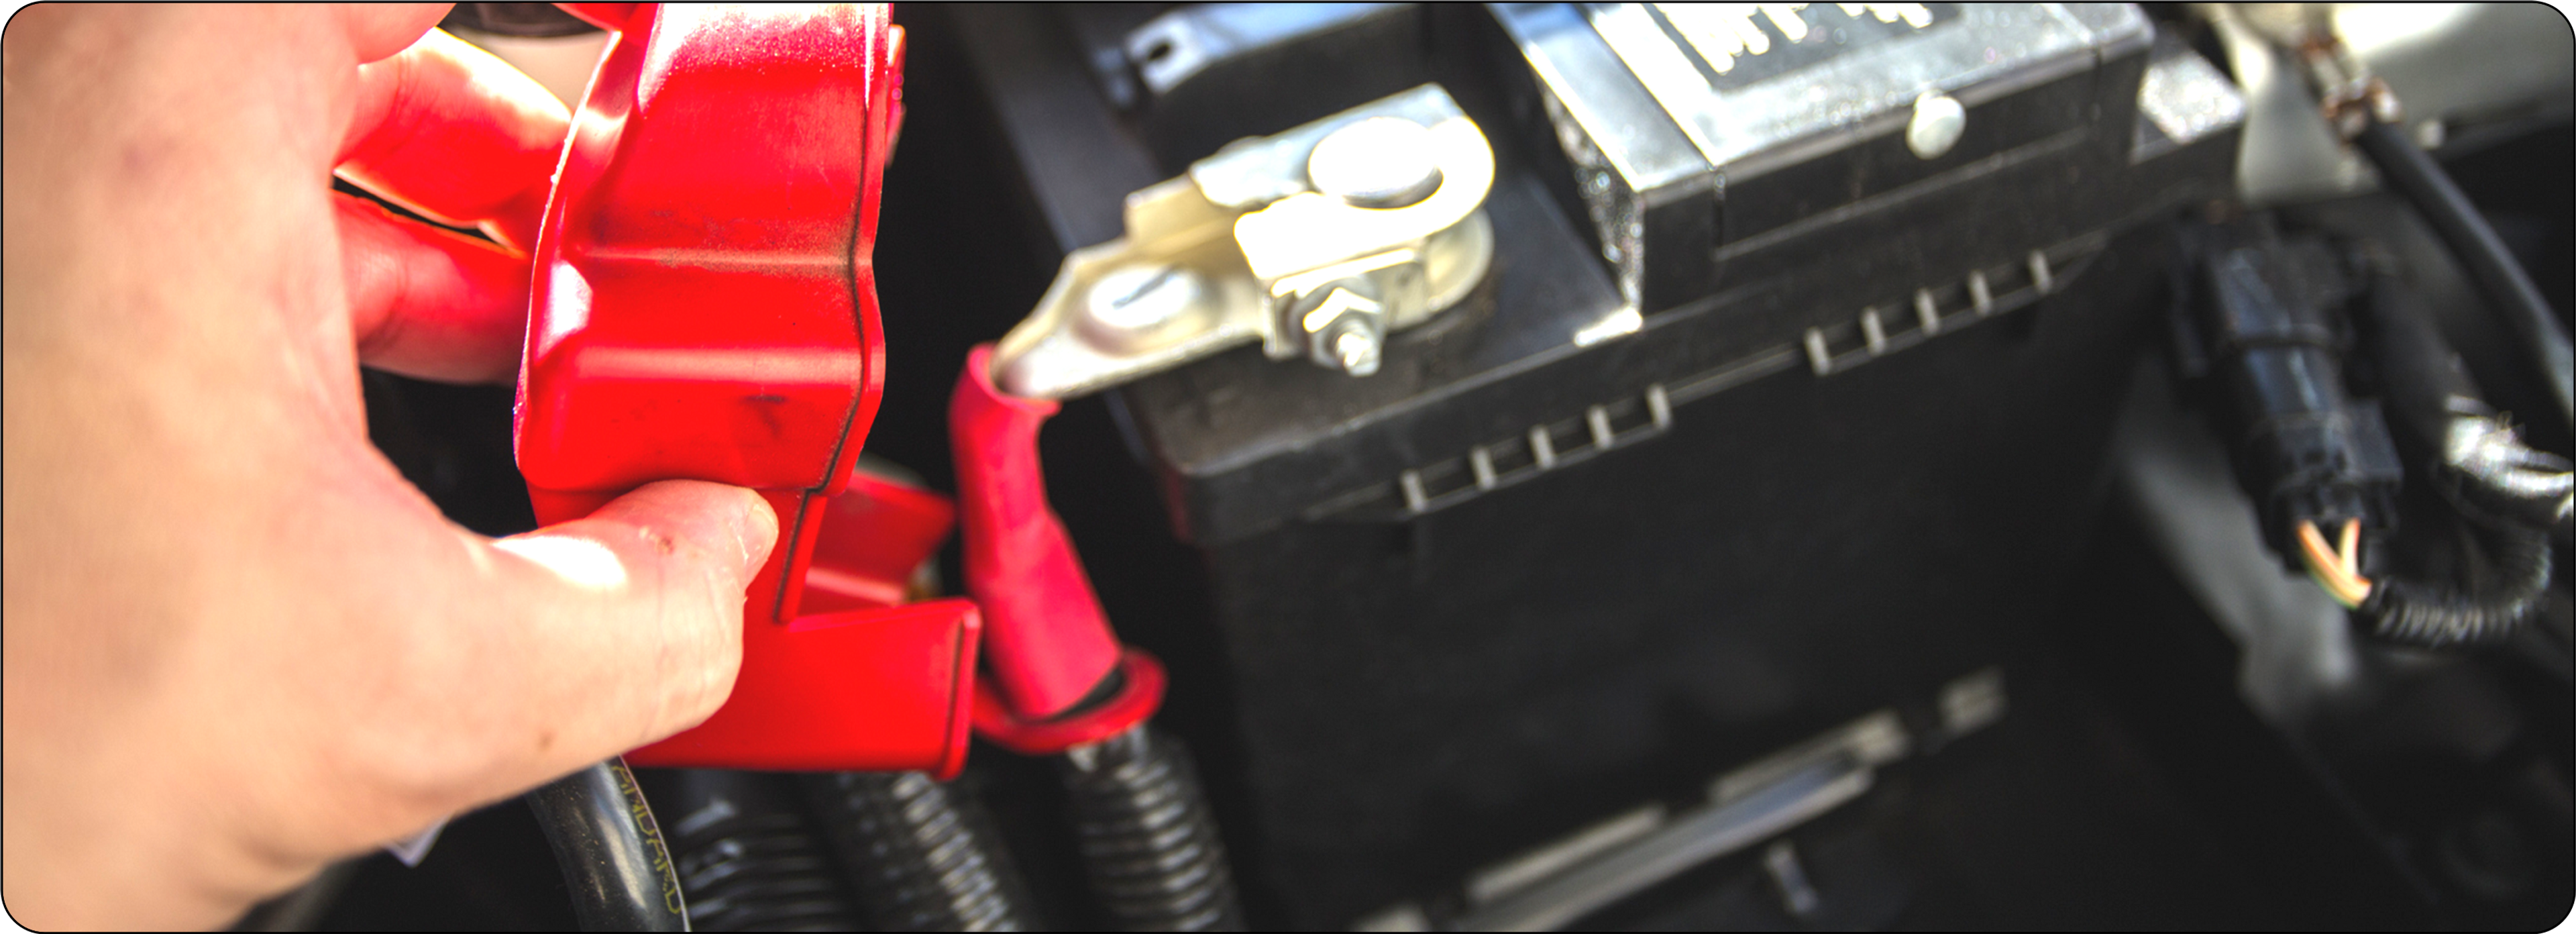 Picture of a man's hand handling a car battery